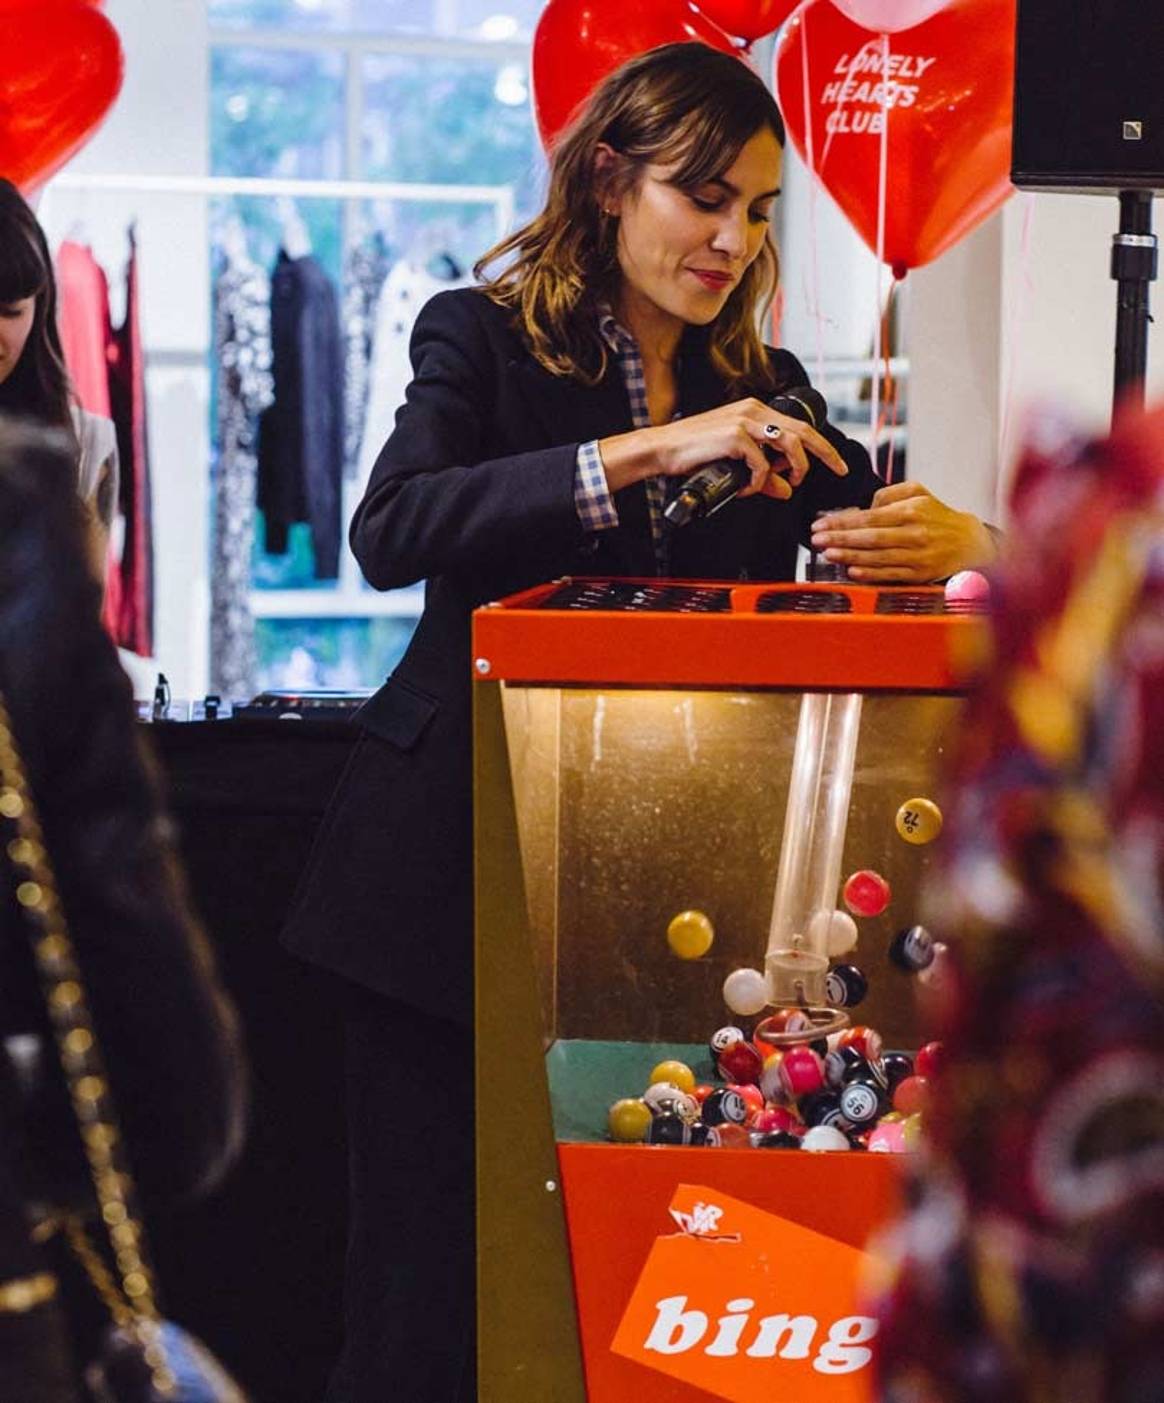 Alexa Chung goes for Bingo at her second collection drop